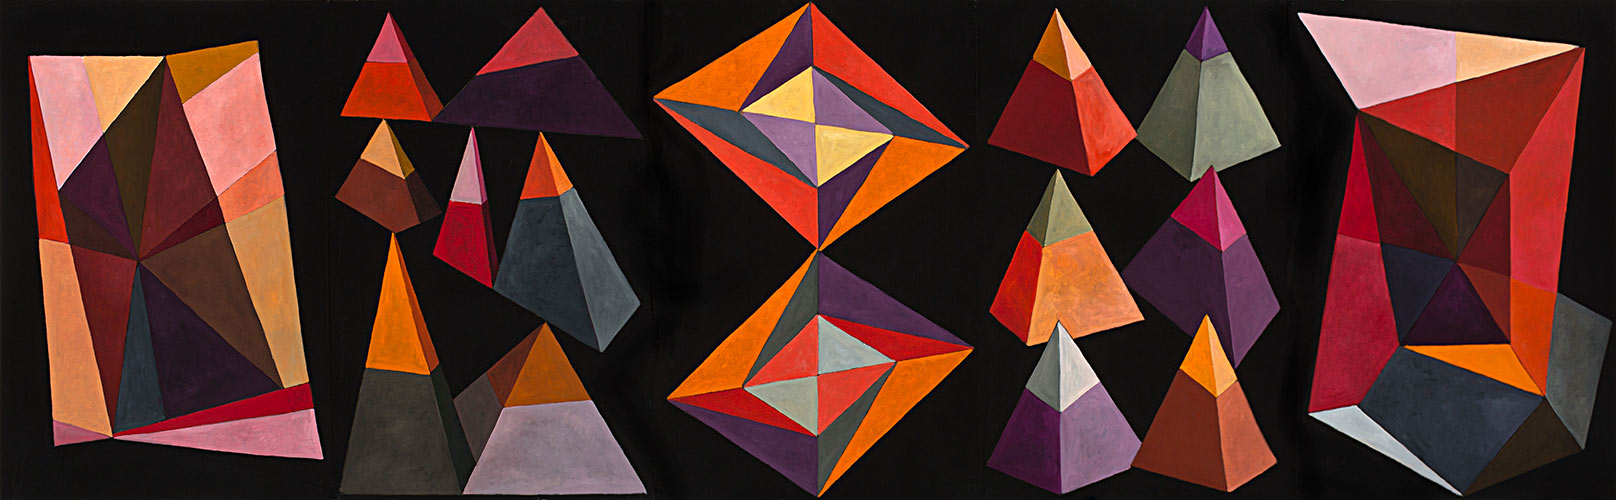 Triangle Shuffle, Oil on paper, Mary Alice Copp